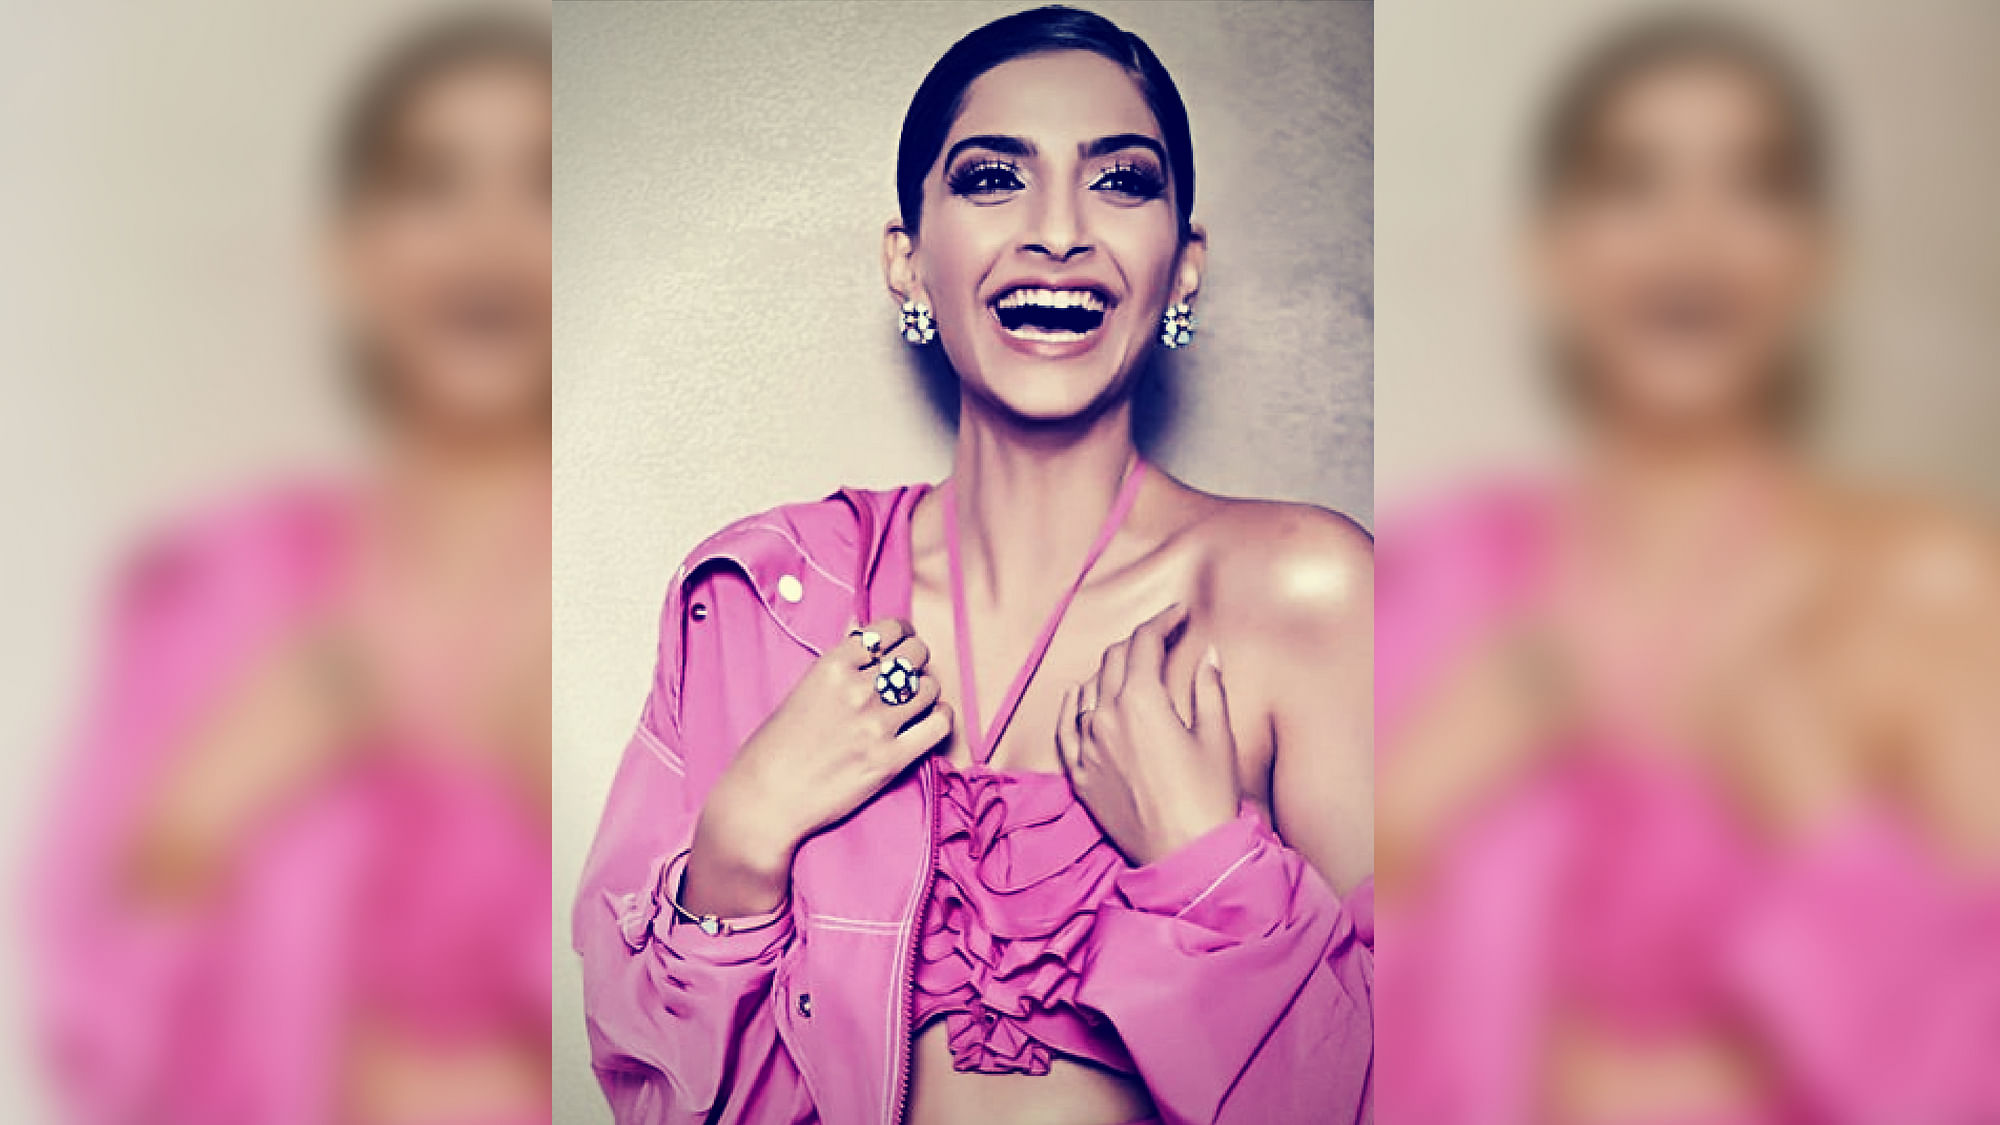 Sonam Kapoor recently changed her social media handles to reflect the surname of her husband.